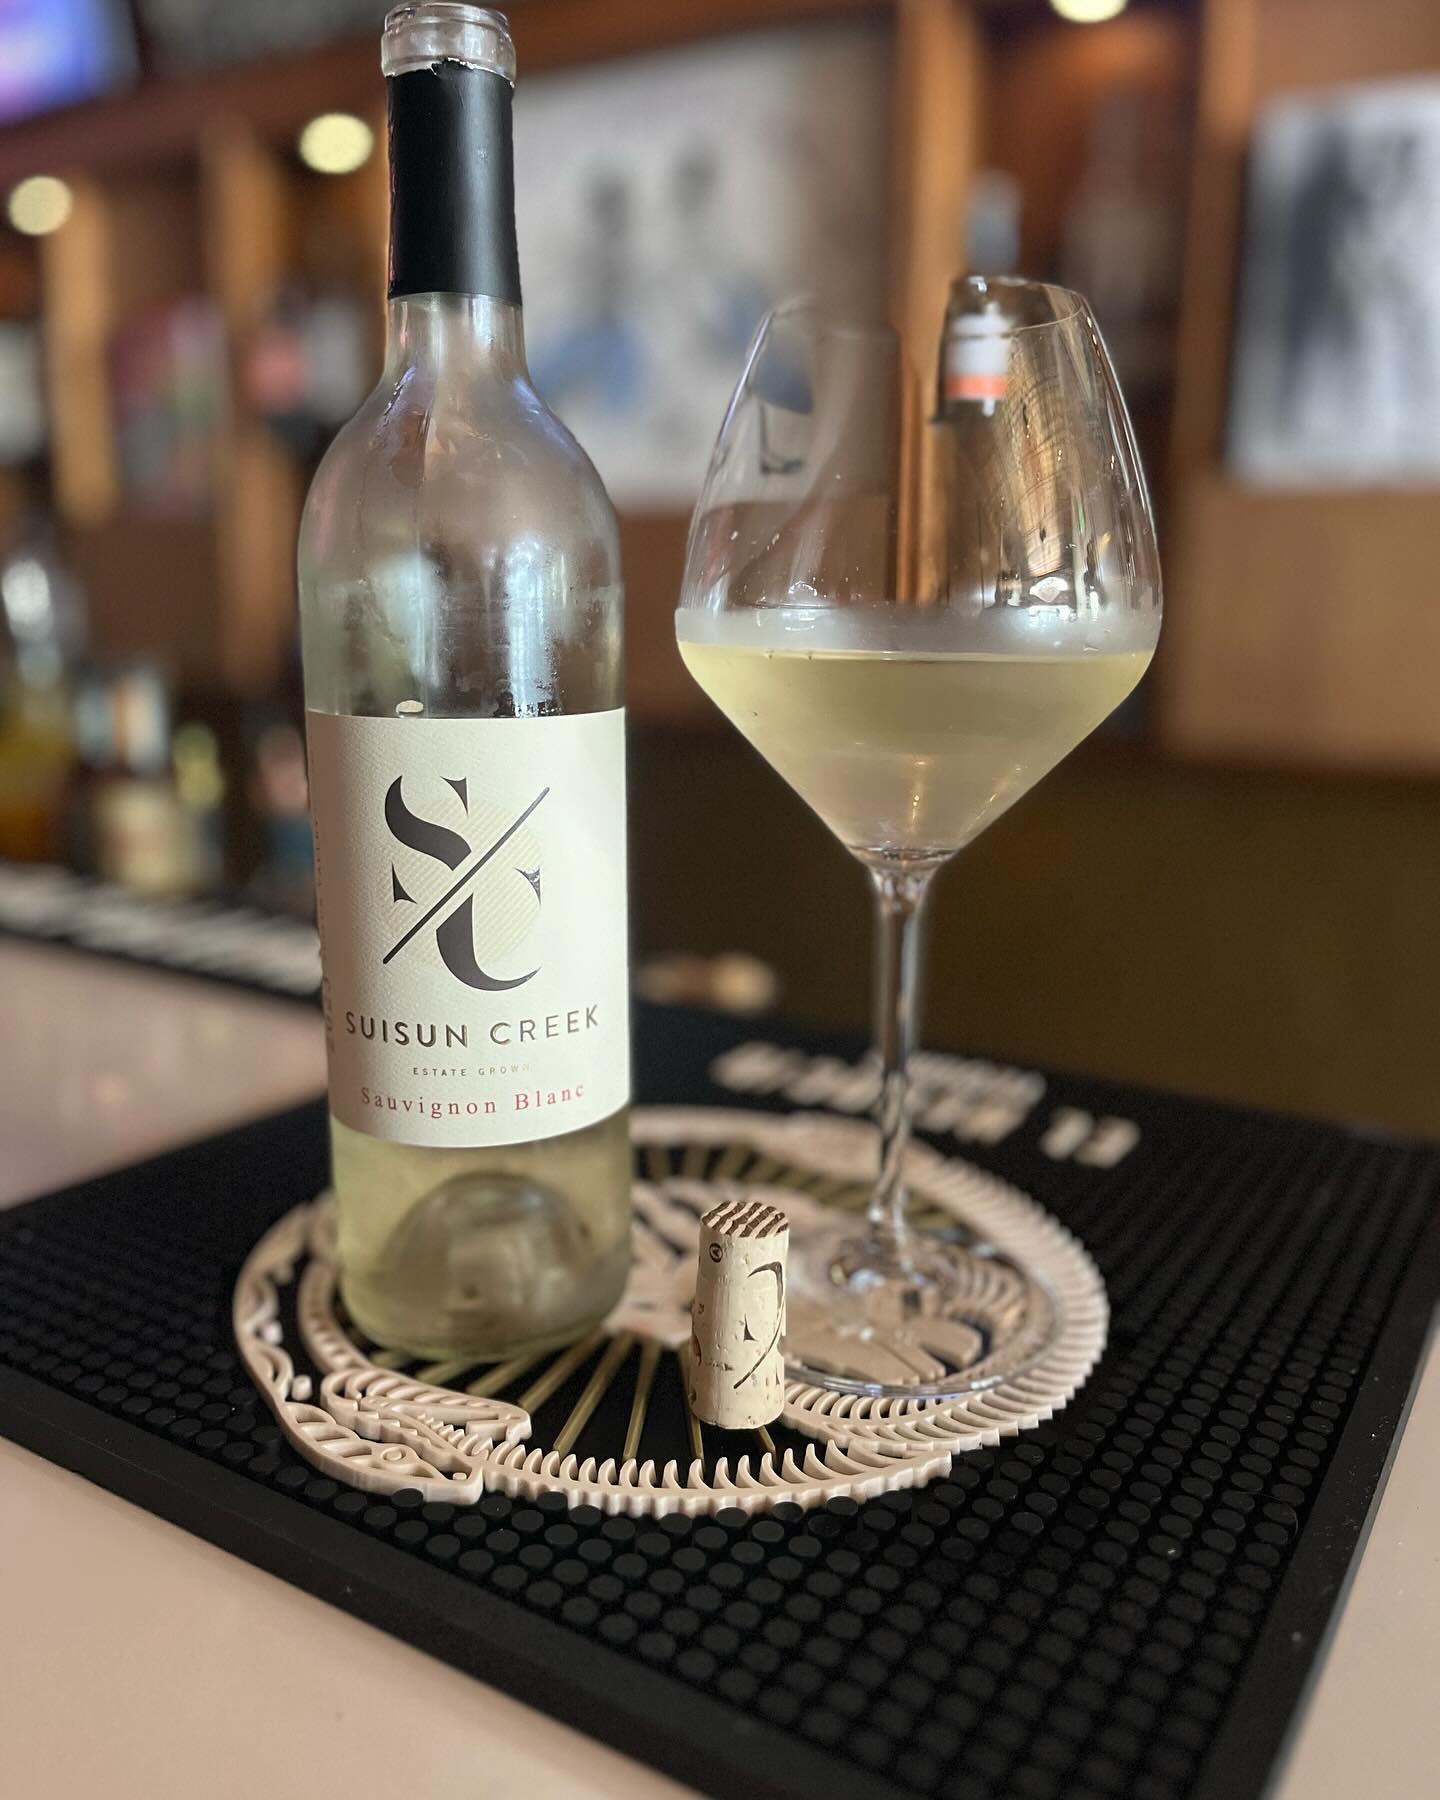 Come by and enjoy a glass of Sauvignon Blanc from Suisun Creek Winery @suisuncreekwinery in Napa Valley.

Winemaker Brian and his wife Katie have deep roots in Napa and Manhattan Beach, respectively. It was a pleasure to learn about their journey and